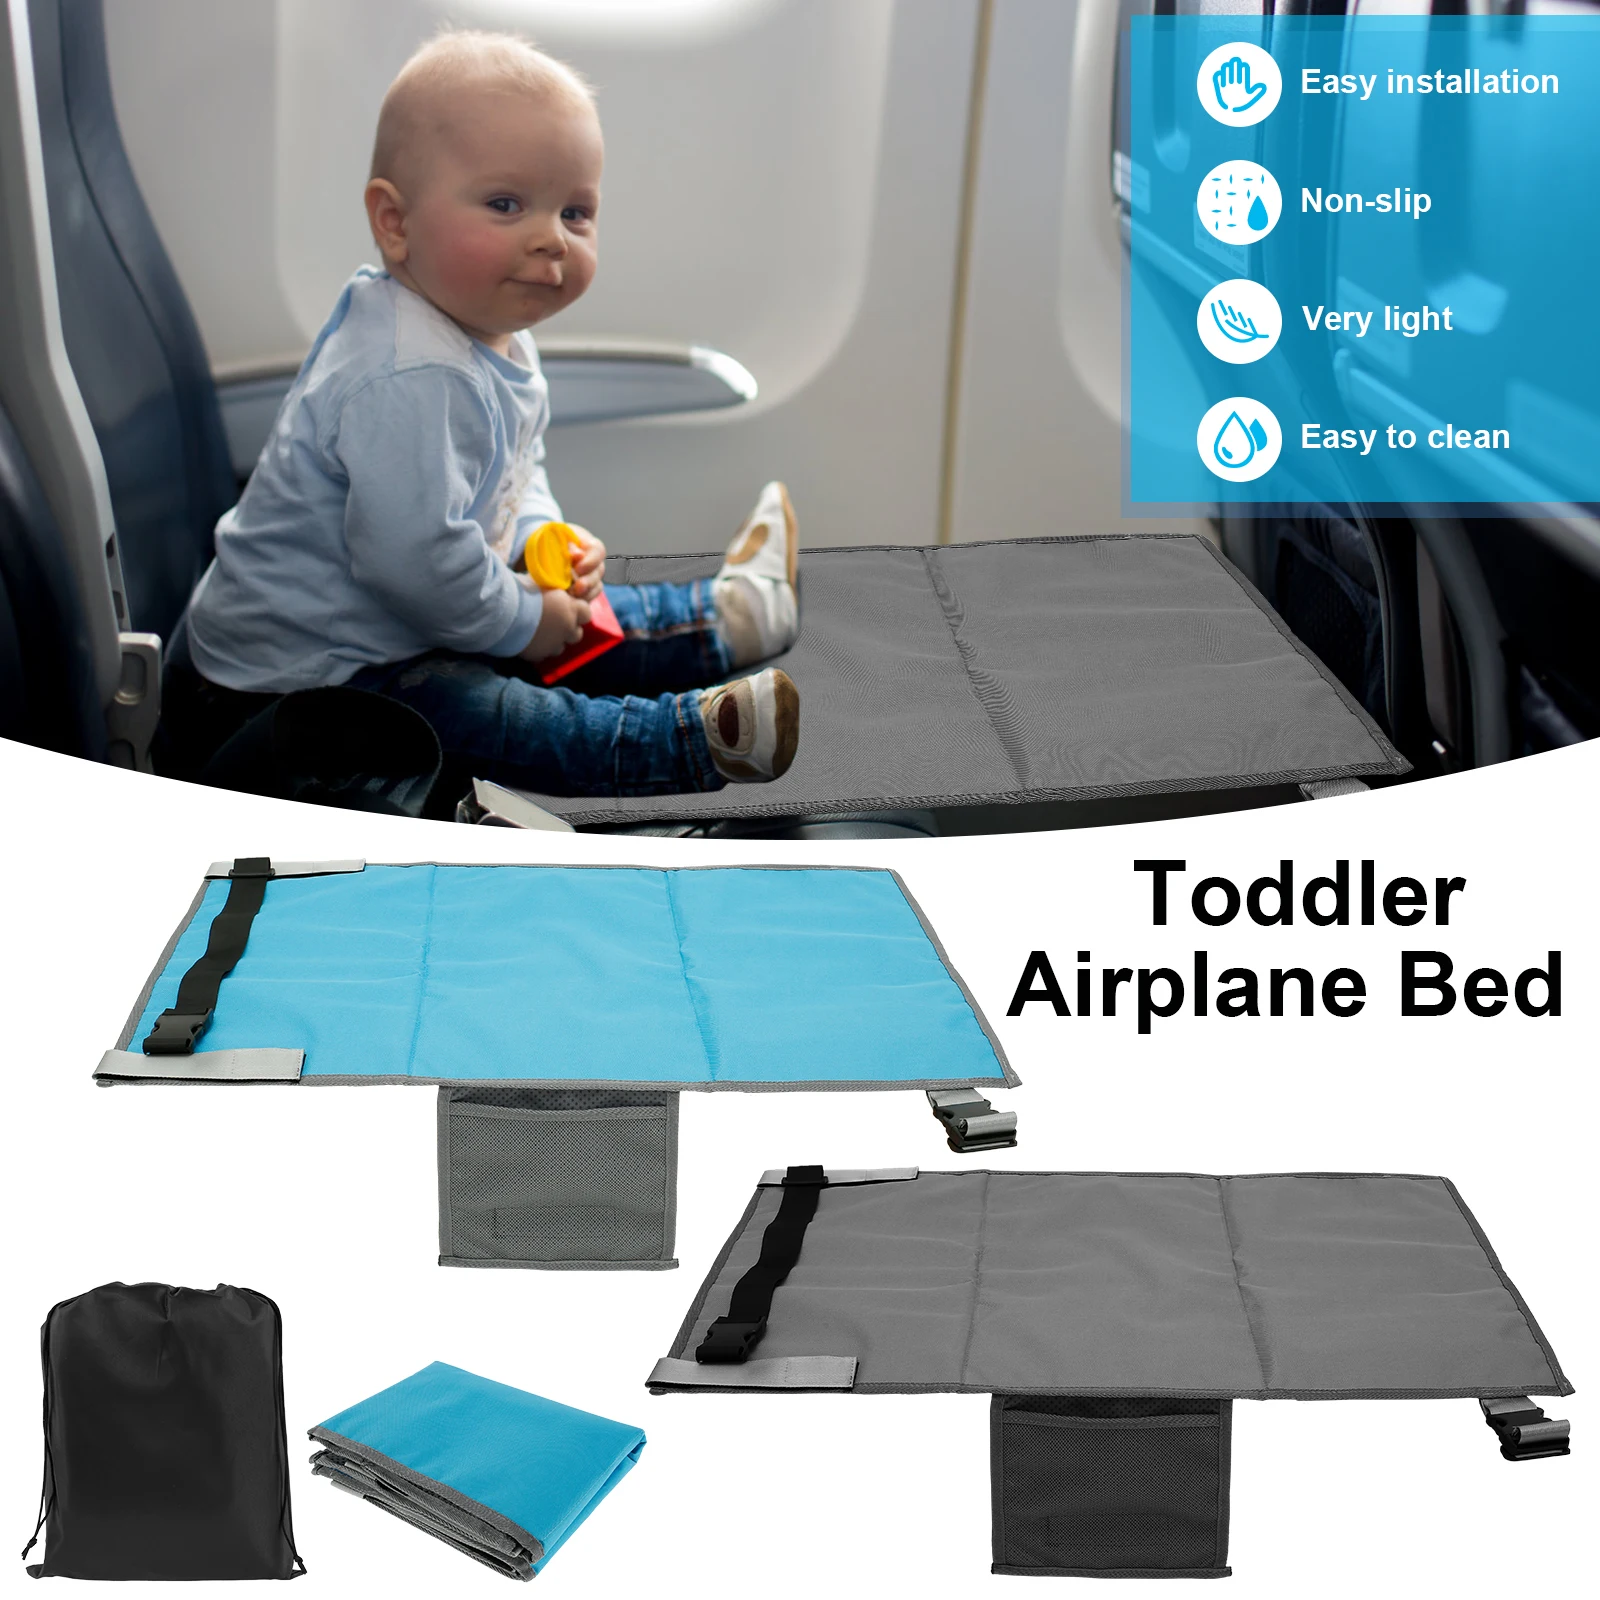 Kids Travel Airplane Bed Portable Children Pedals Beds Foot Leg Rest Hammock Baby Footrest Bed Toddler Airplane Seat Extender